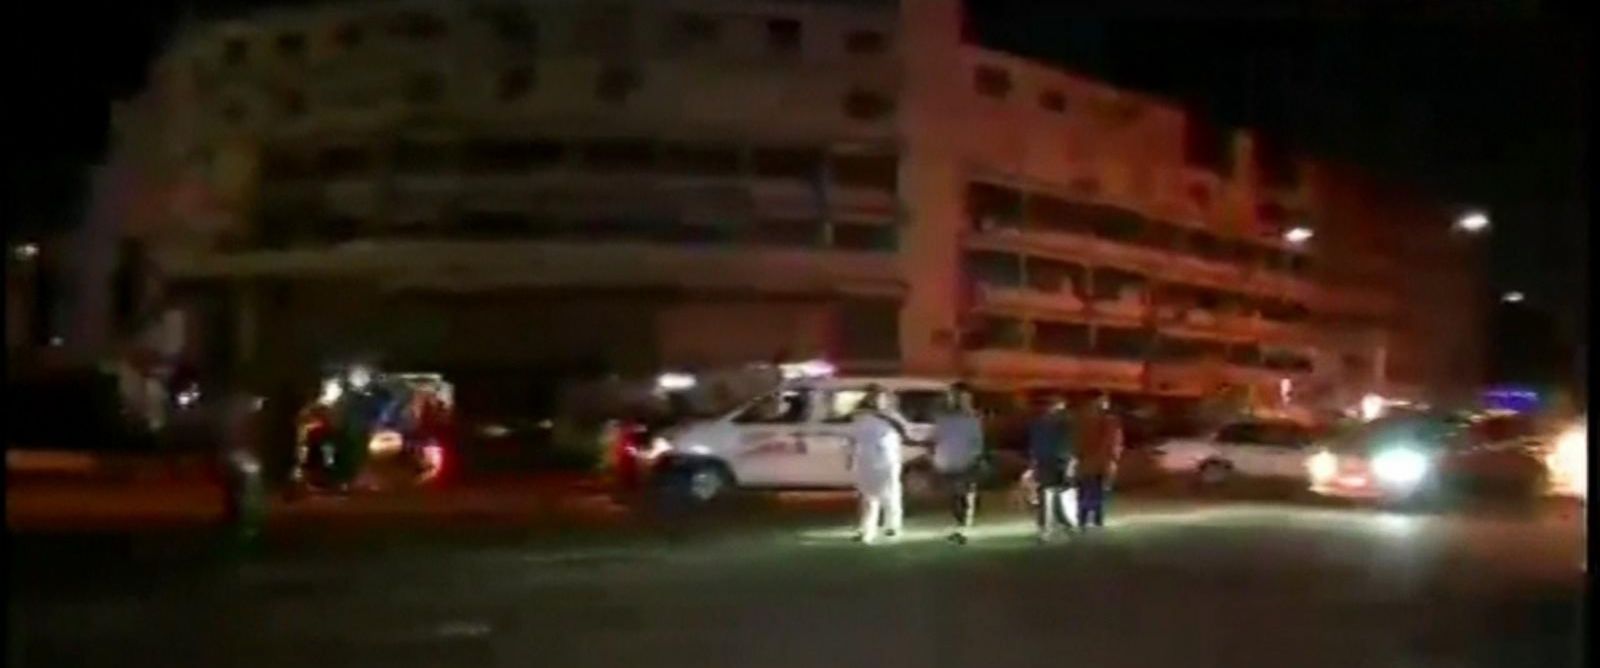 Shooting and Hostage Situation Underway in Bangladesh